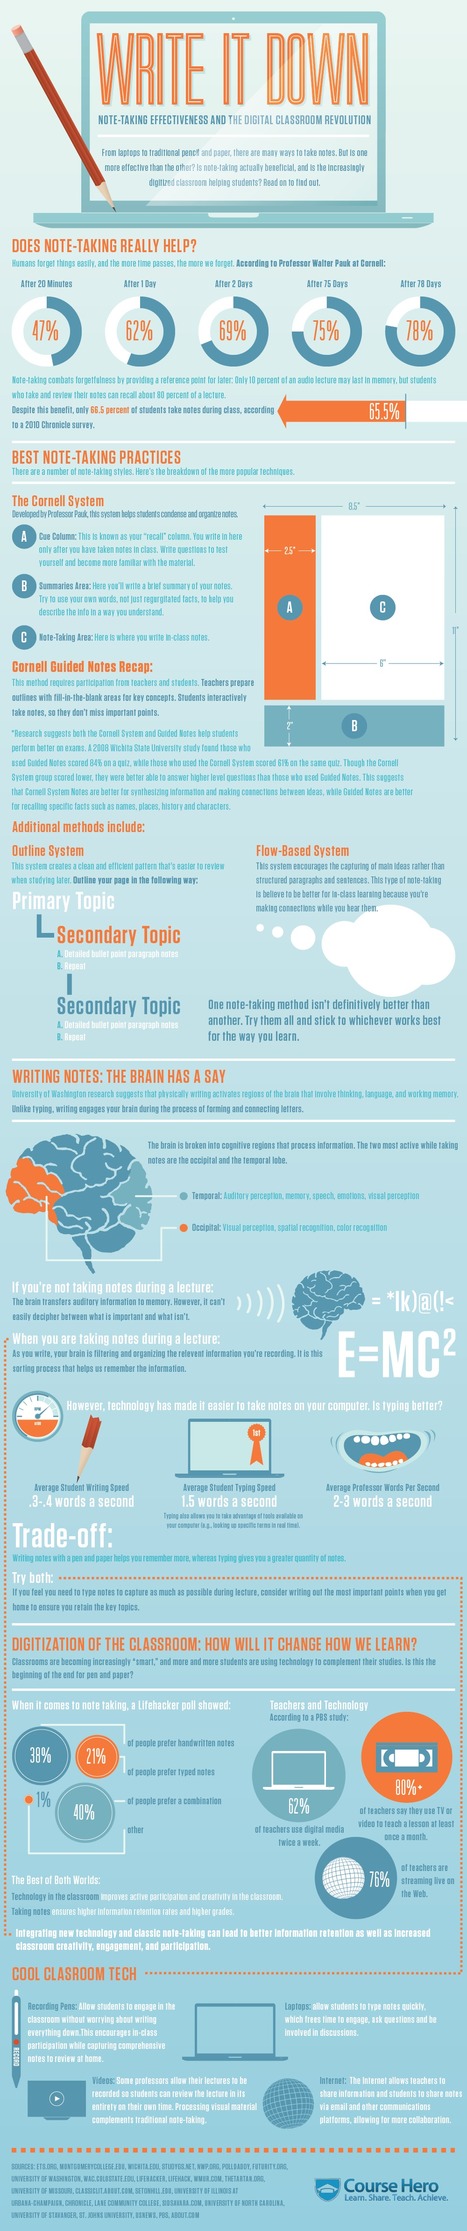 Write It Down: Best Note-taking Practices | 21st Century Learning and Teaching | Scoop.it